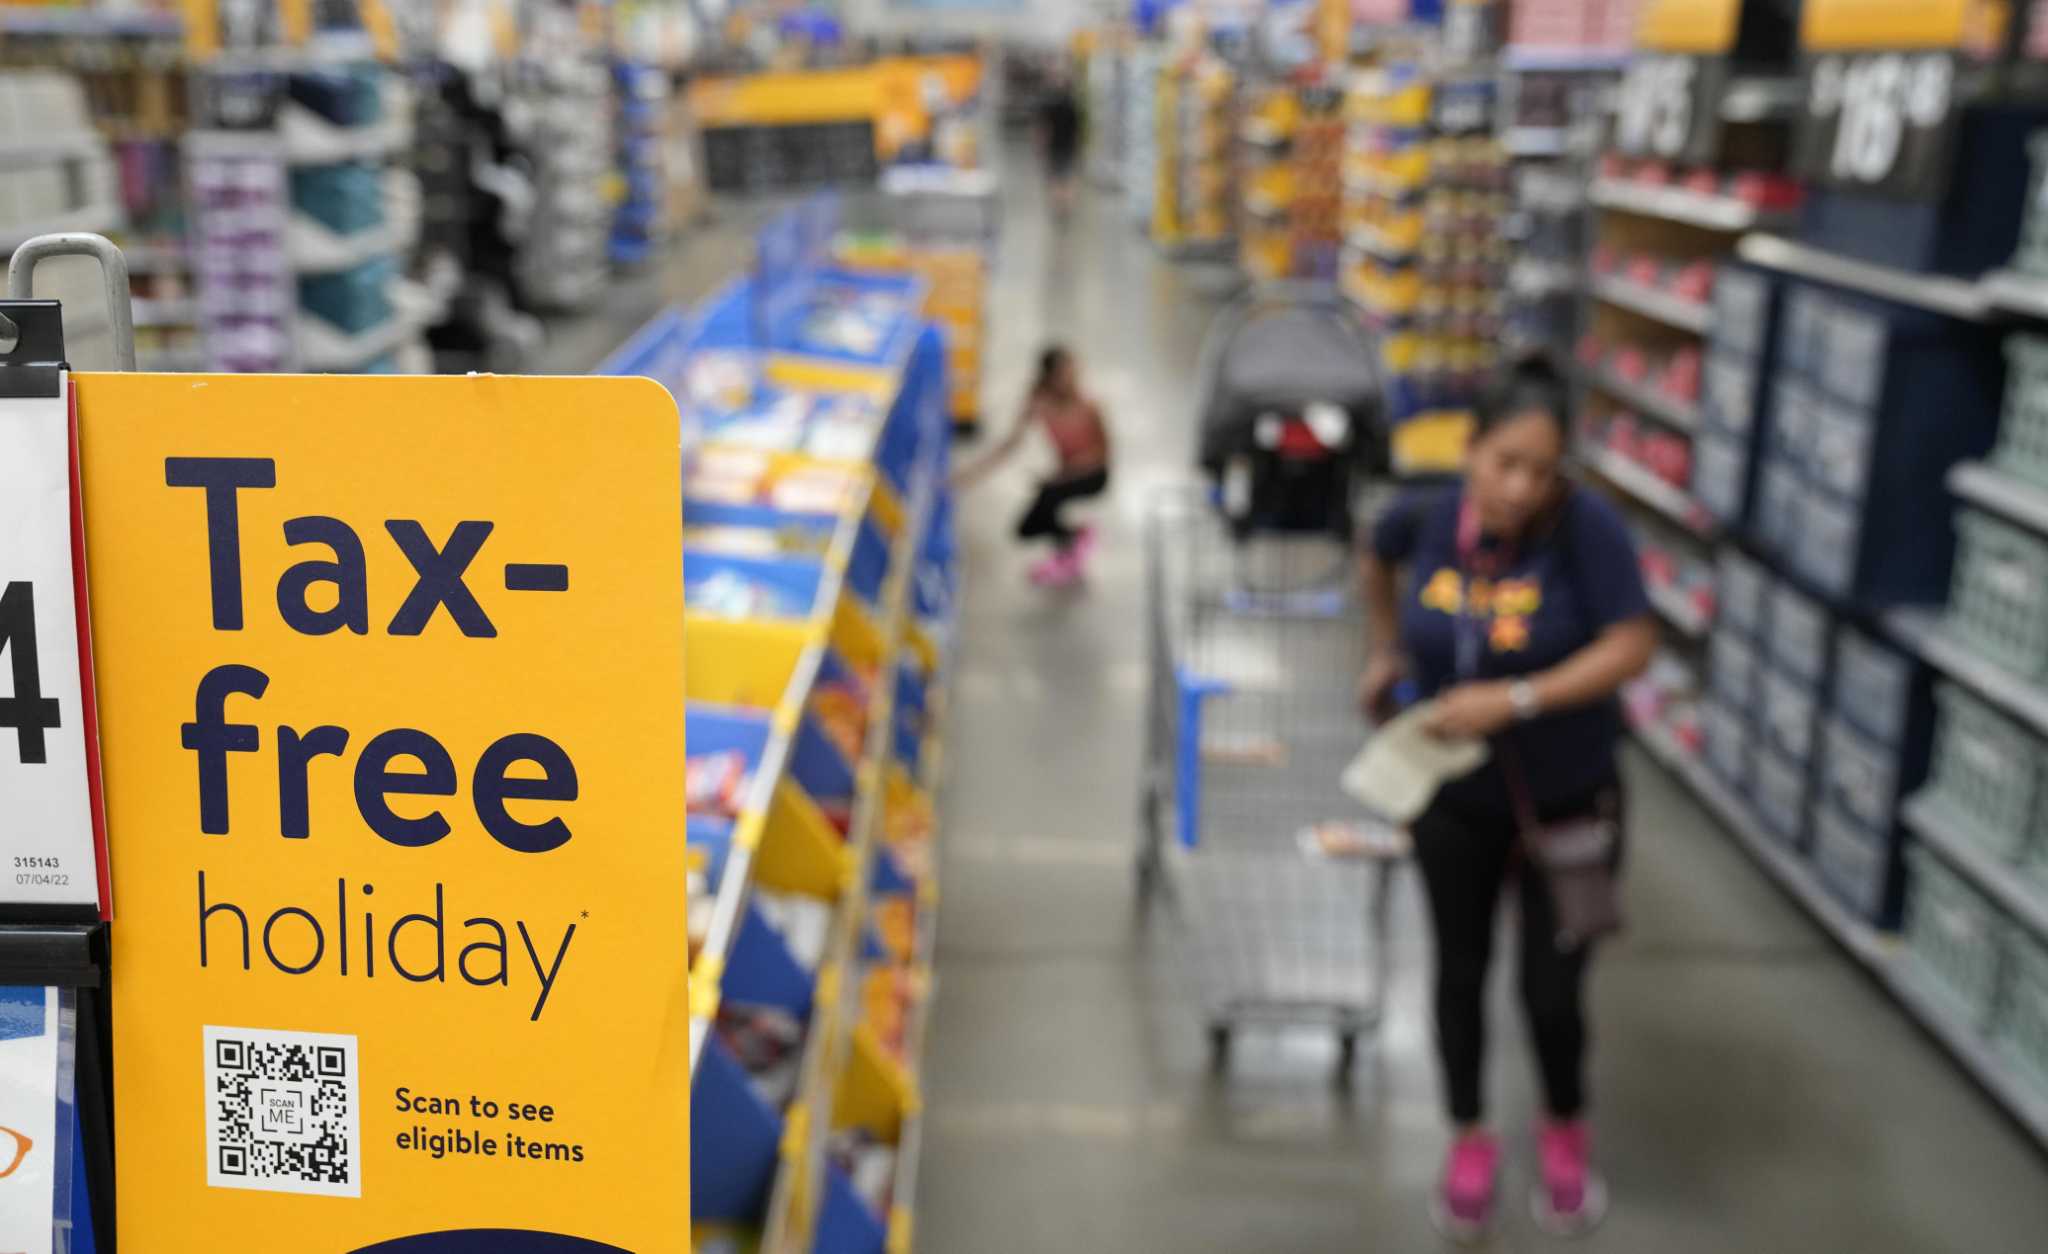 Walmart raising minimum wage to 14, giving 180K Texas workers a boost